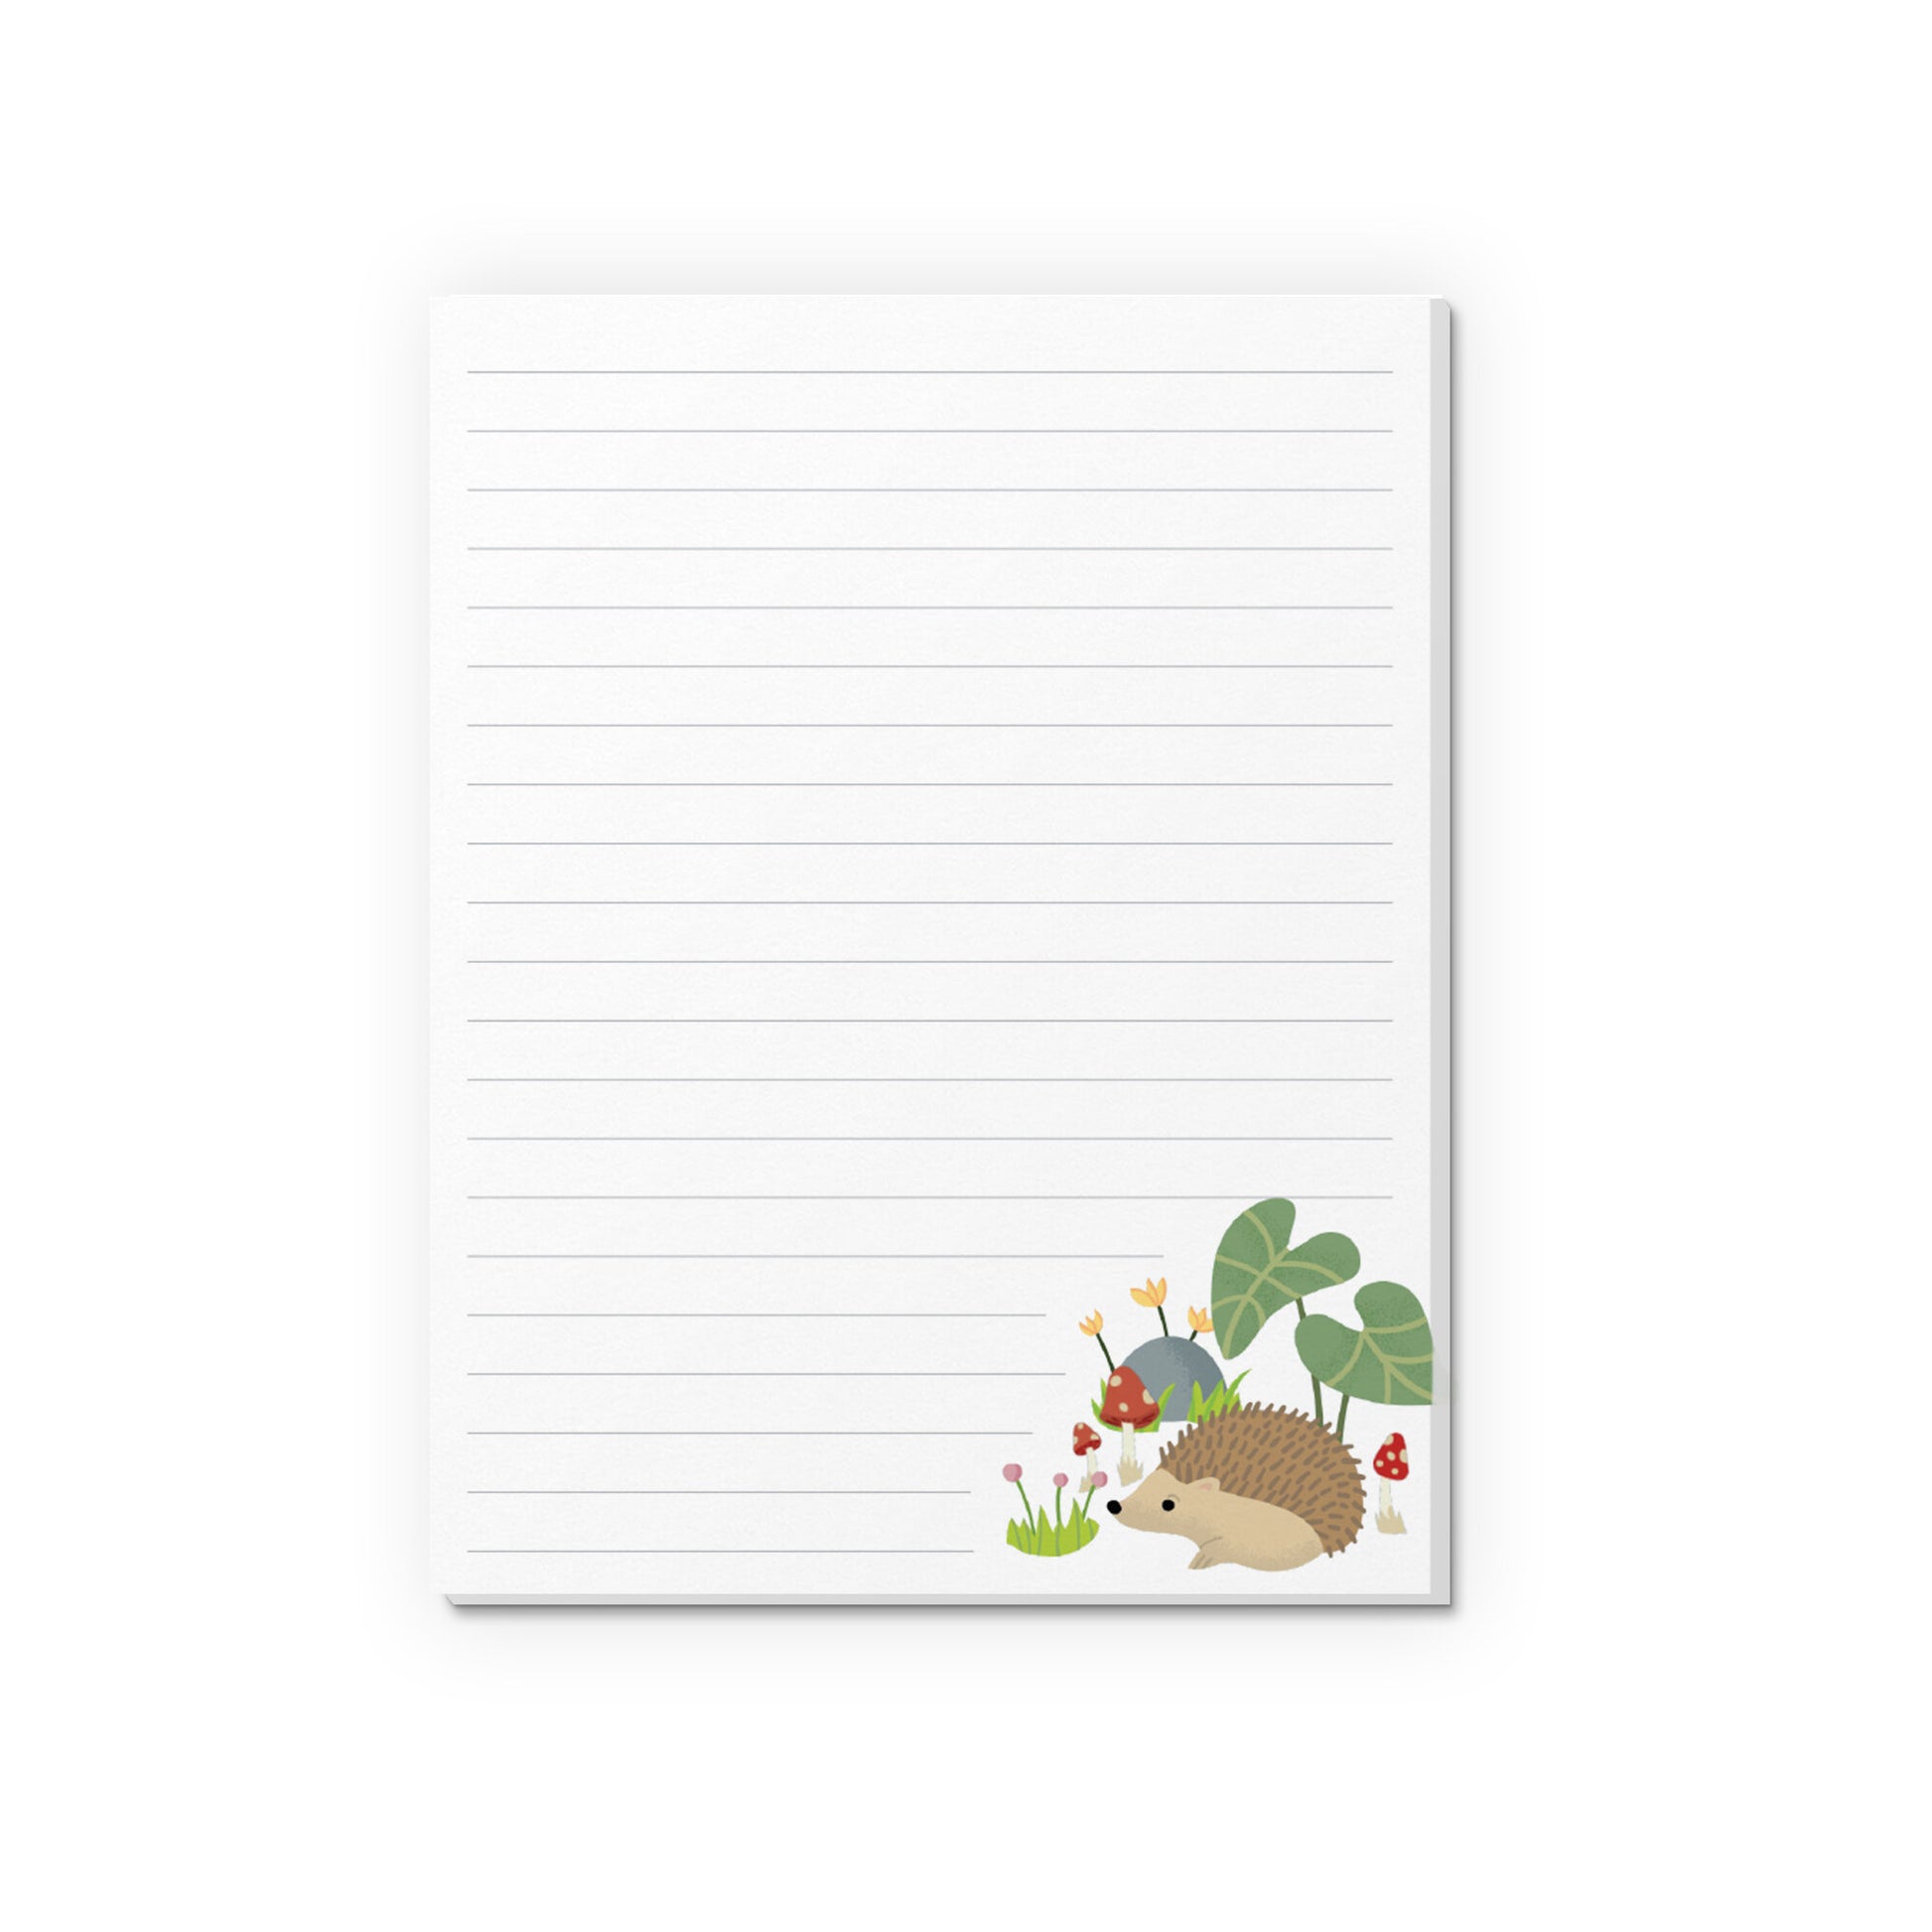 Mini to do list notepad with cute woodland illustrations of a hedgehog, mushrooms and forest flowers.